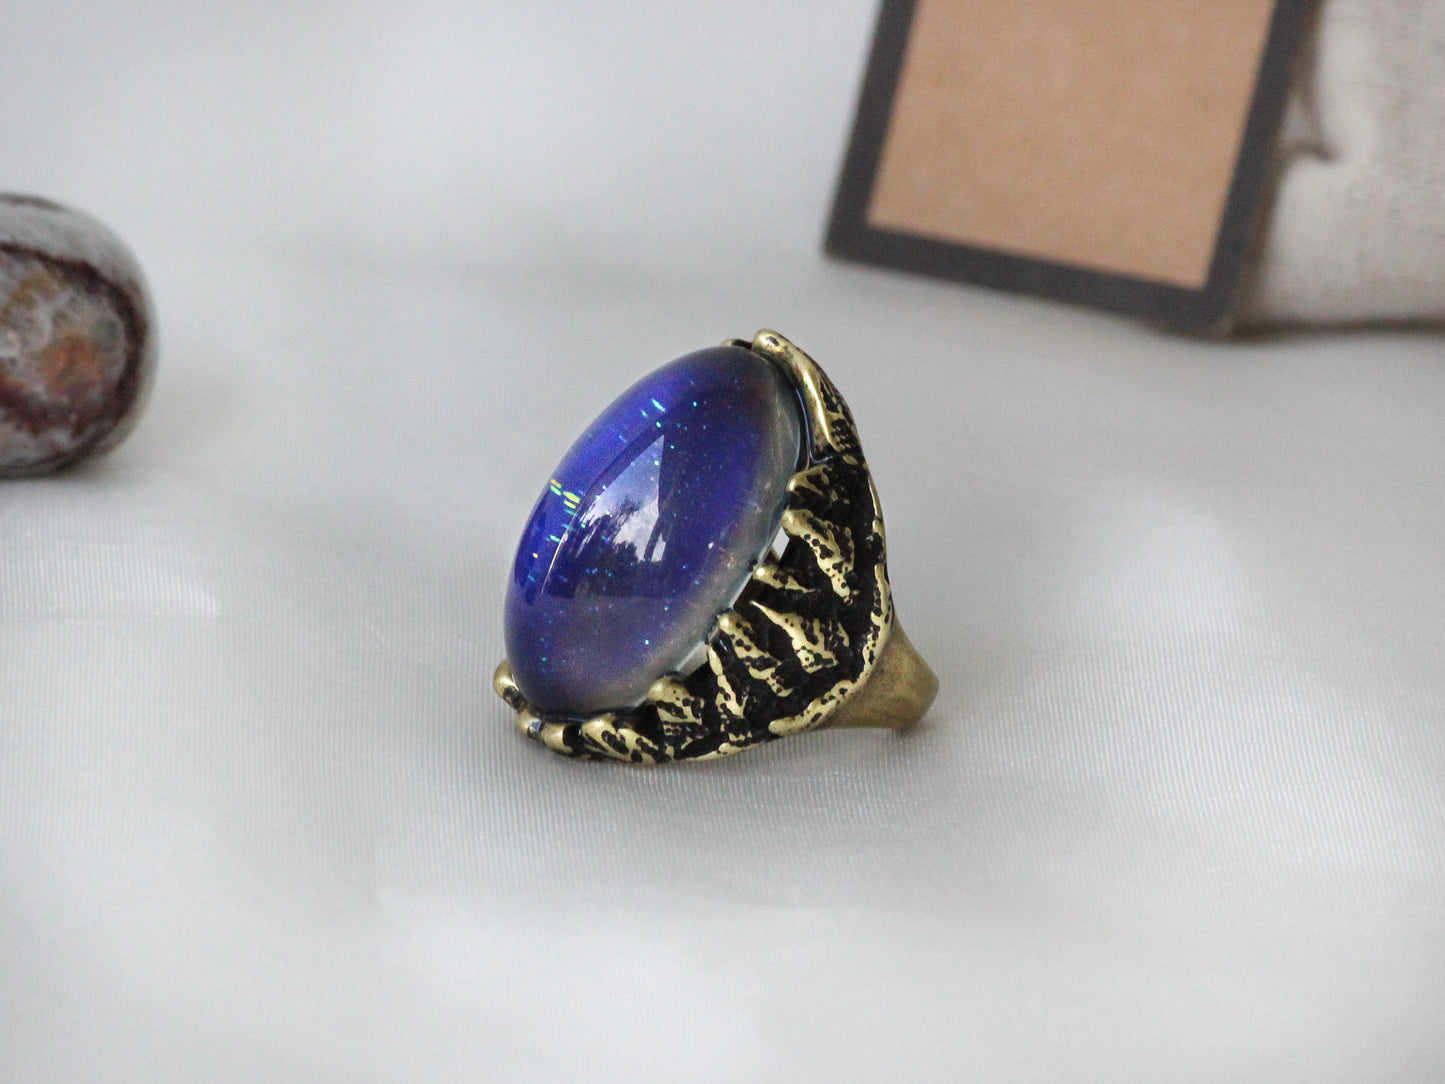 Antique Gold Plating Captured Oval Stone Mood Ring.